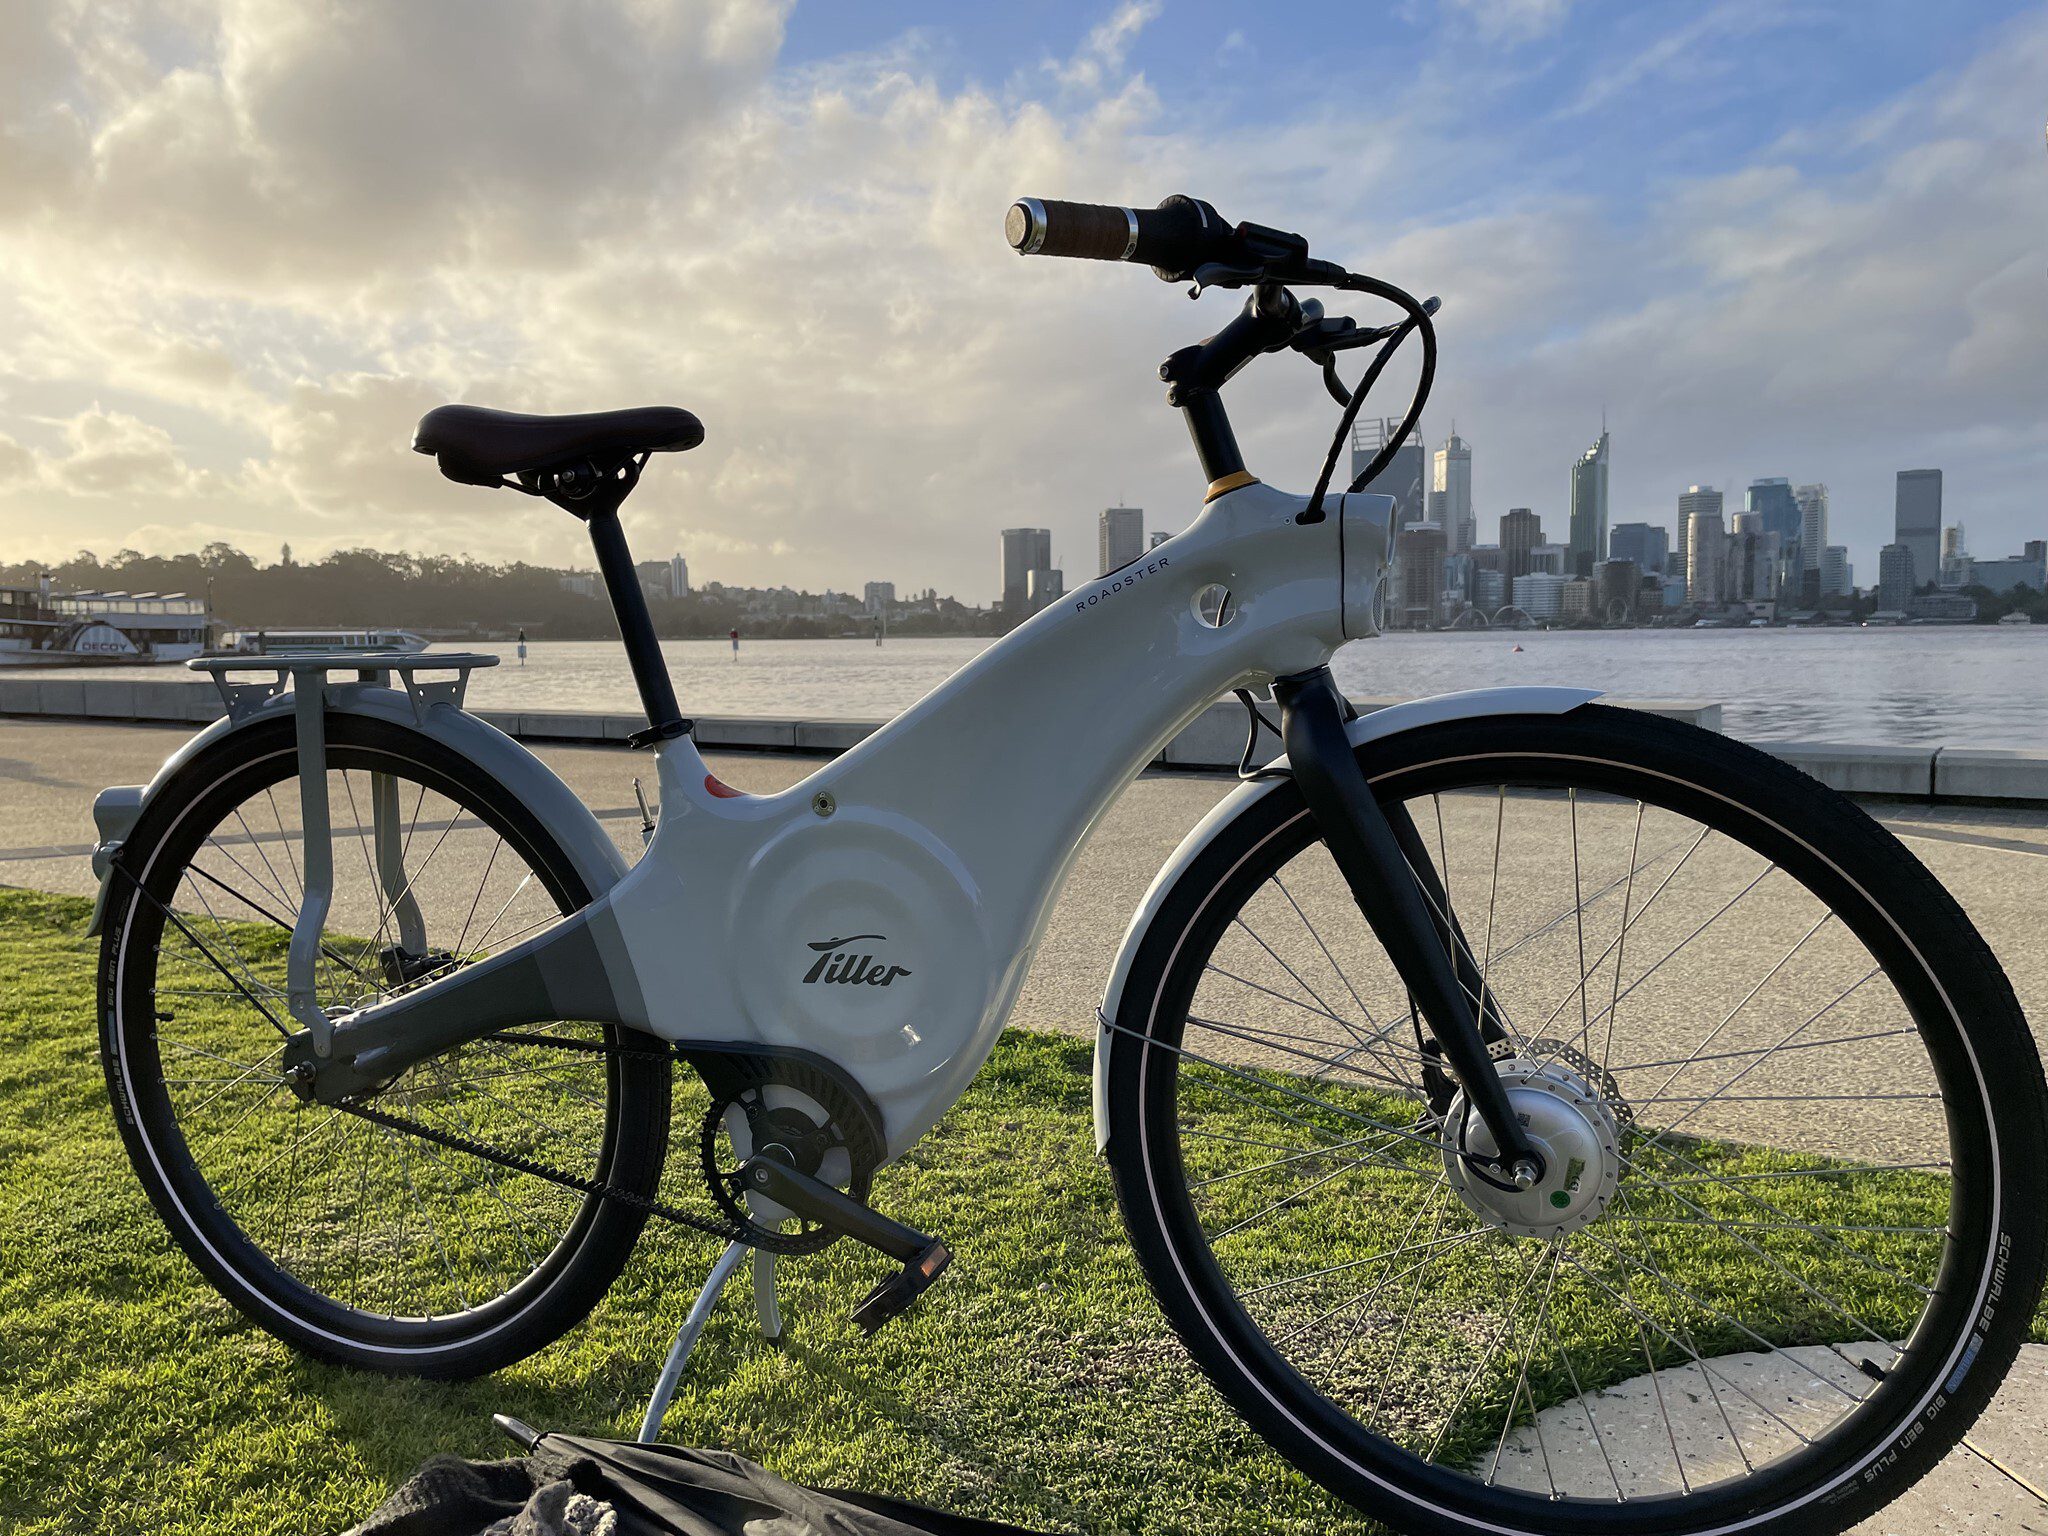 Bike in front of Perth Skyline